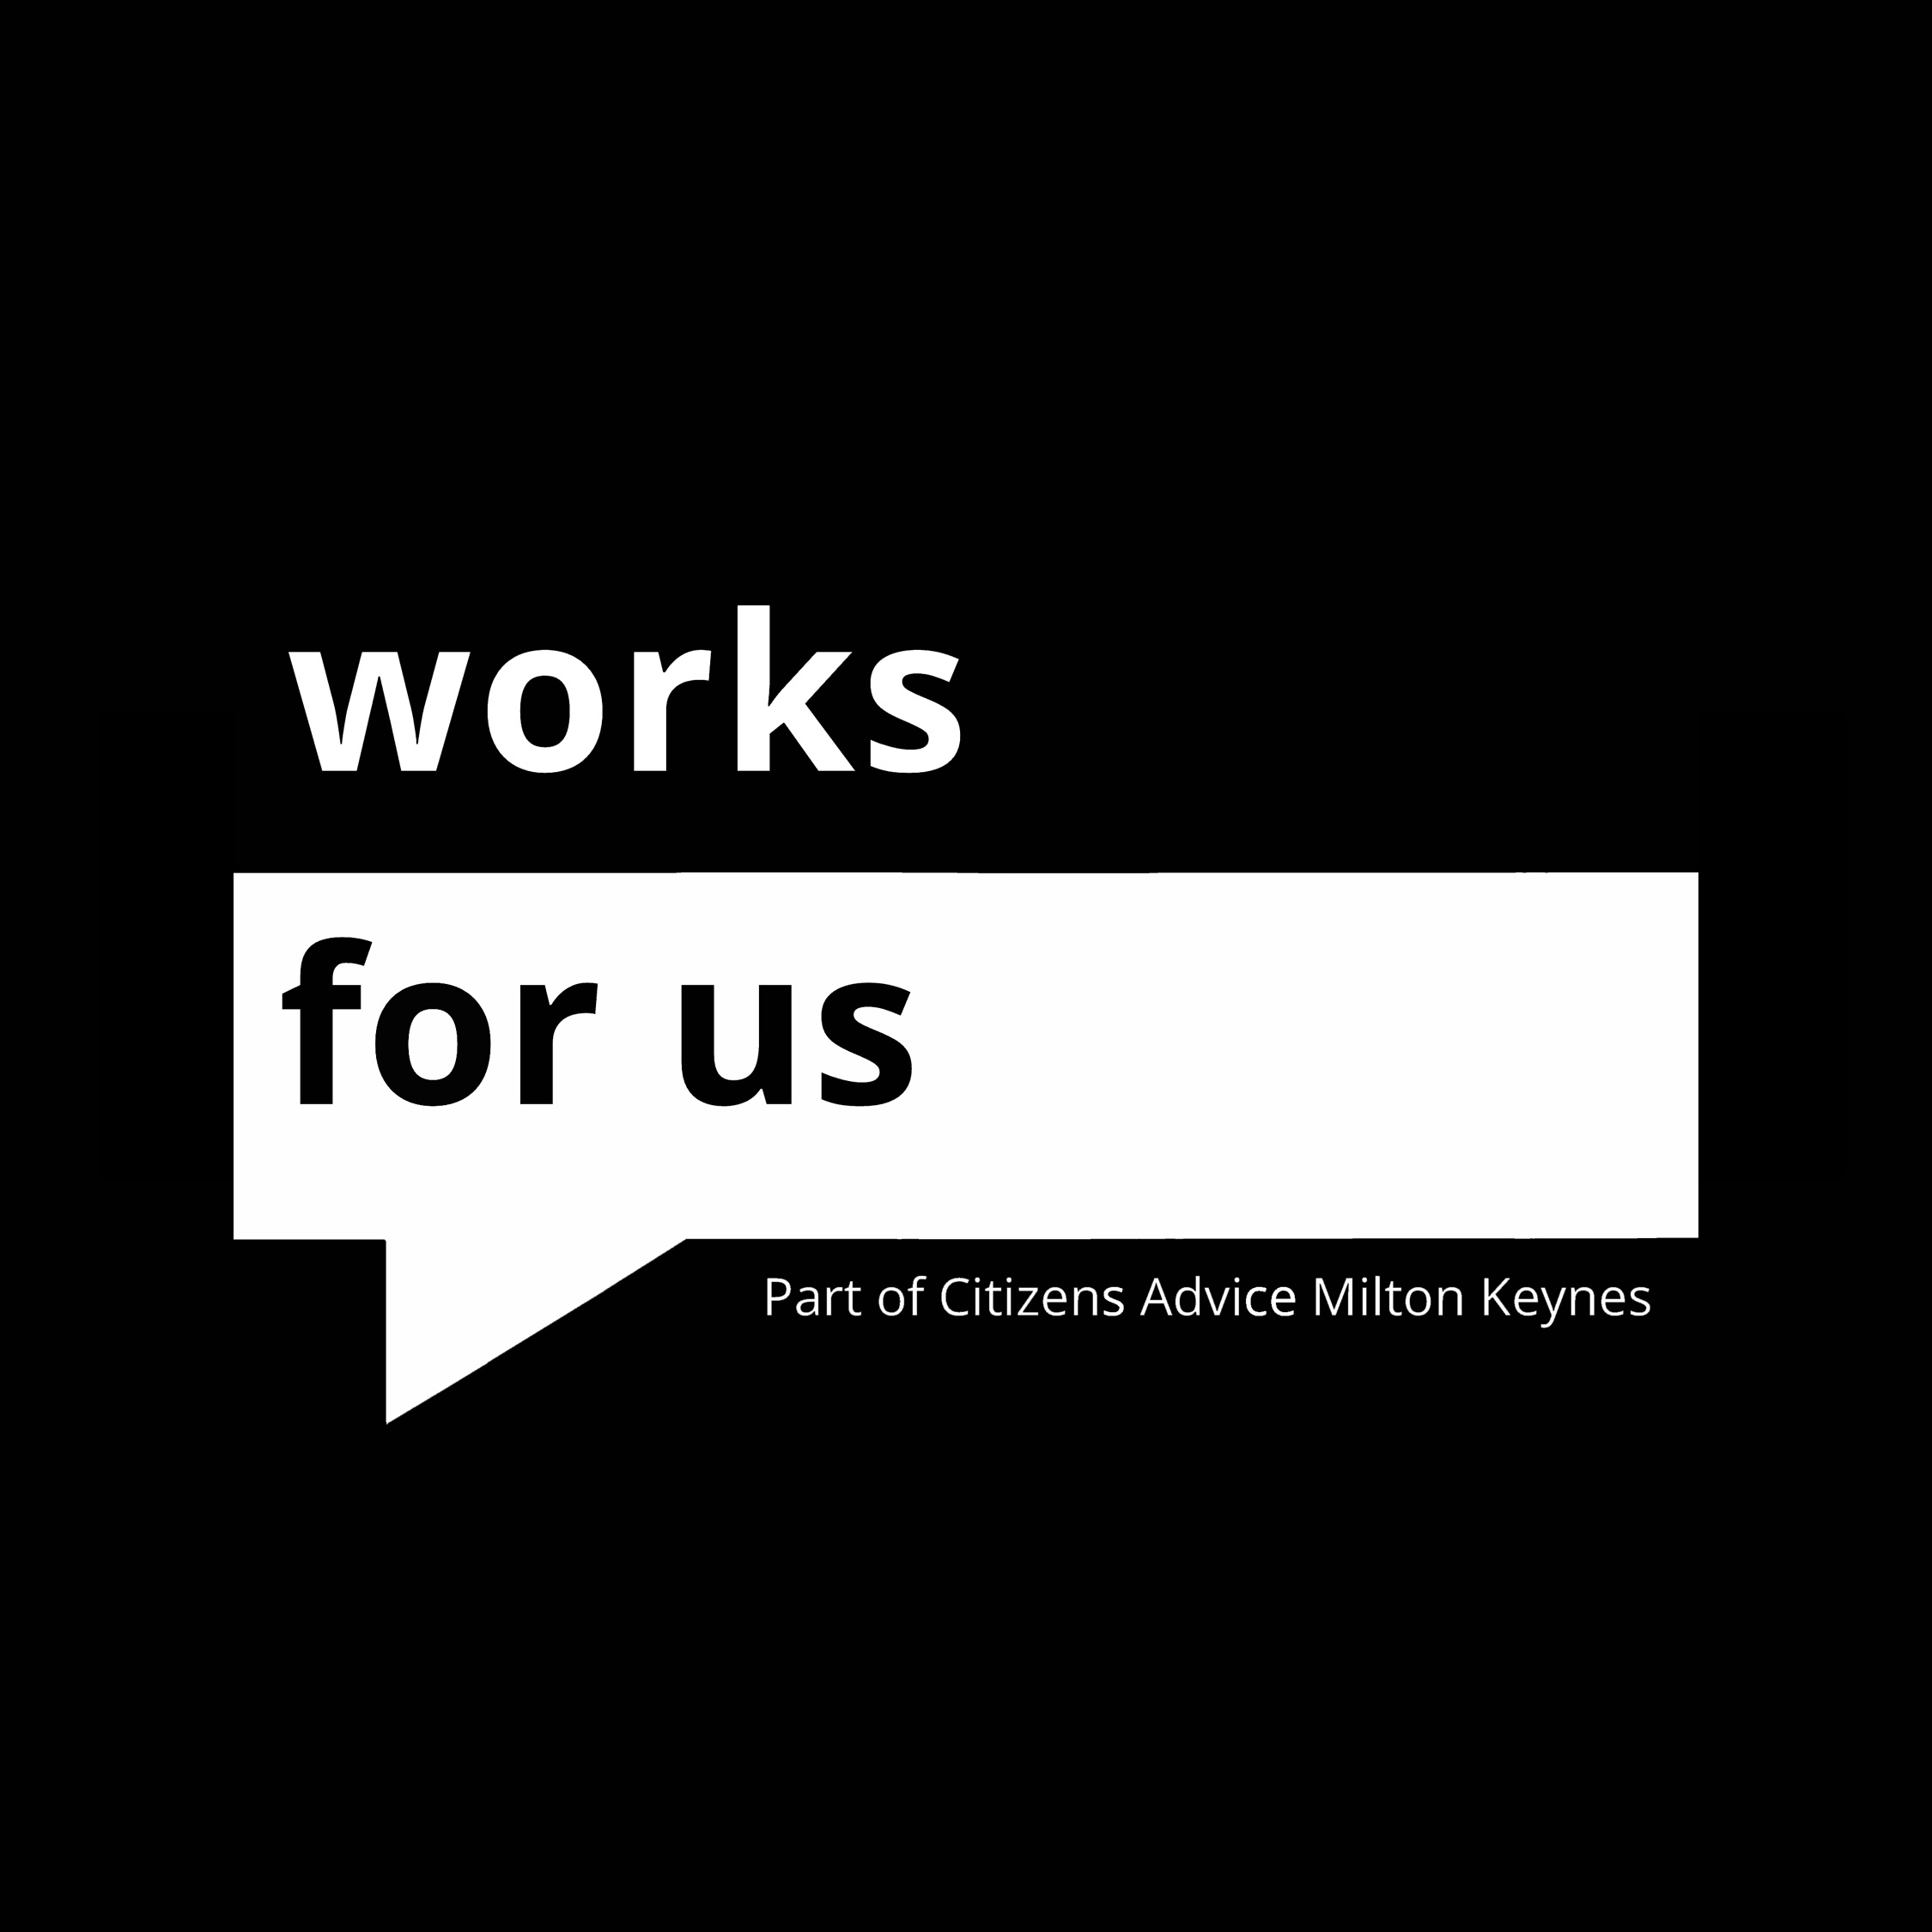 Work for Us - Employment and Training Support